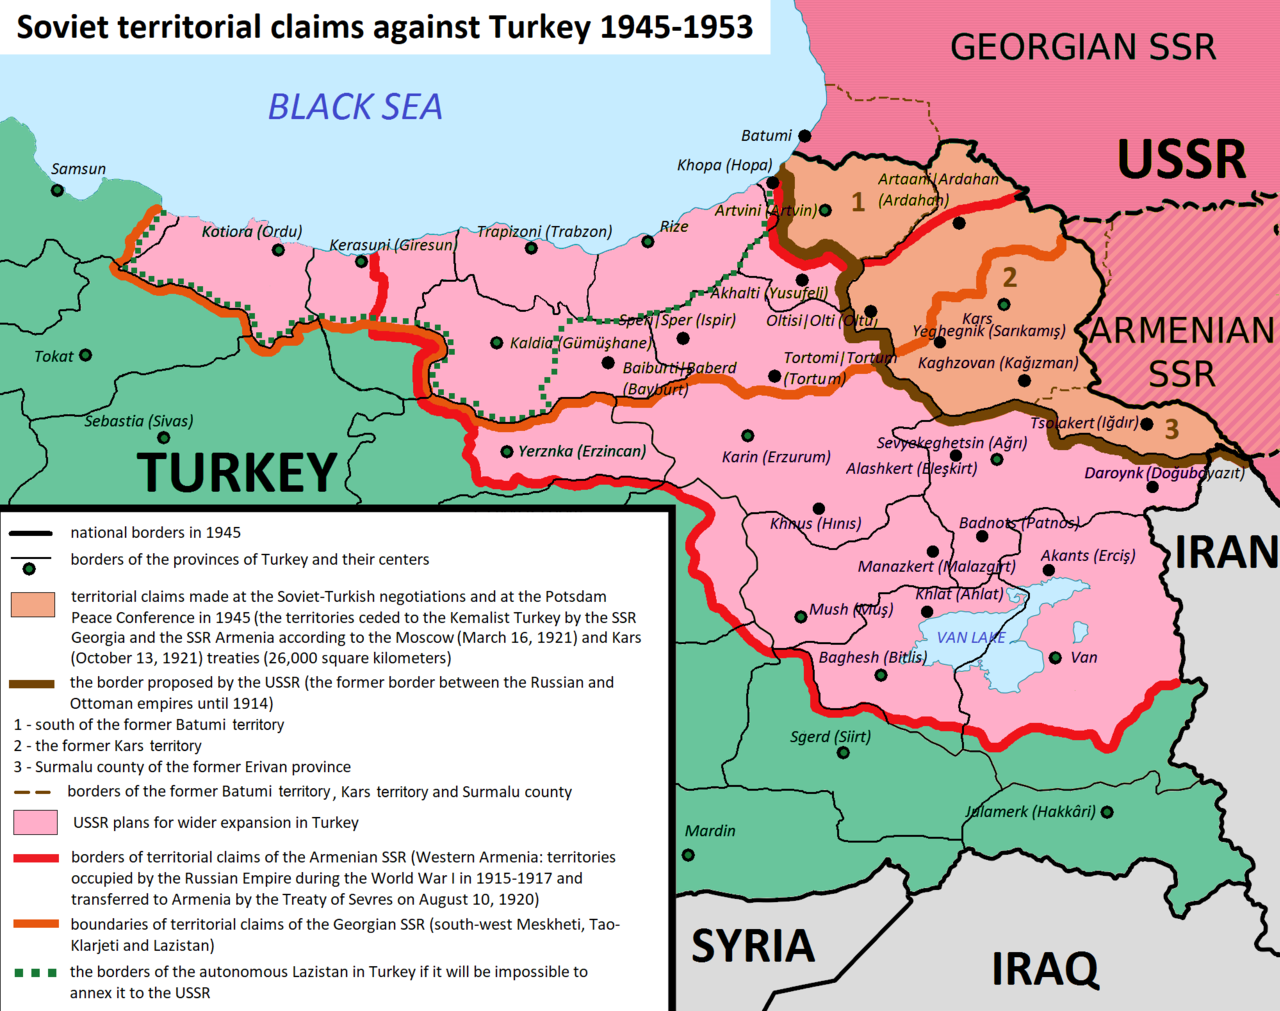 Soviet_territorial_claims_against_Turkey_1945-1953.png